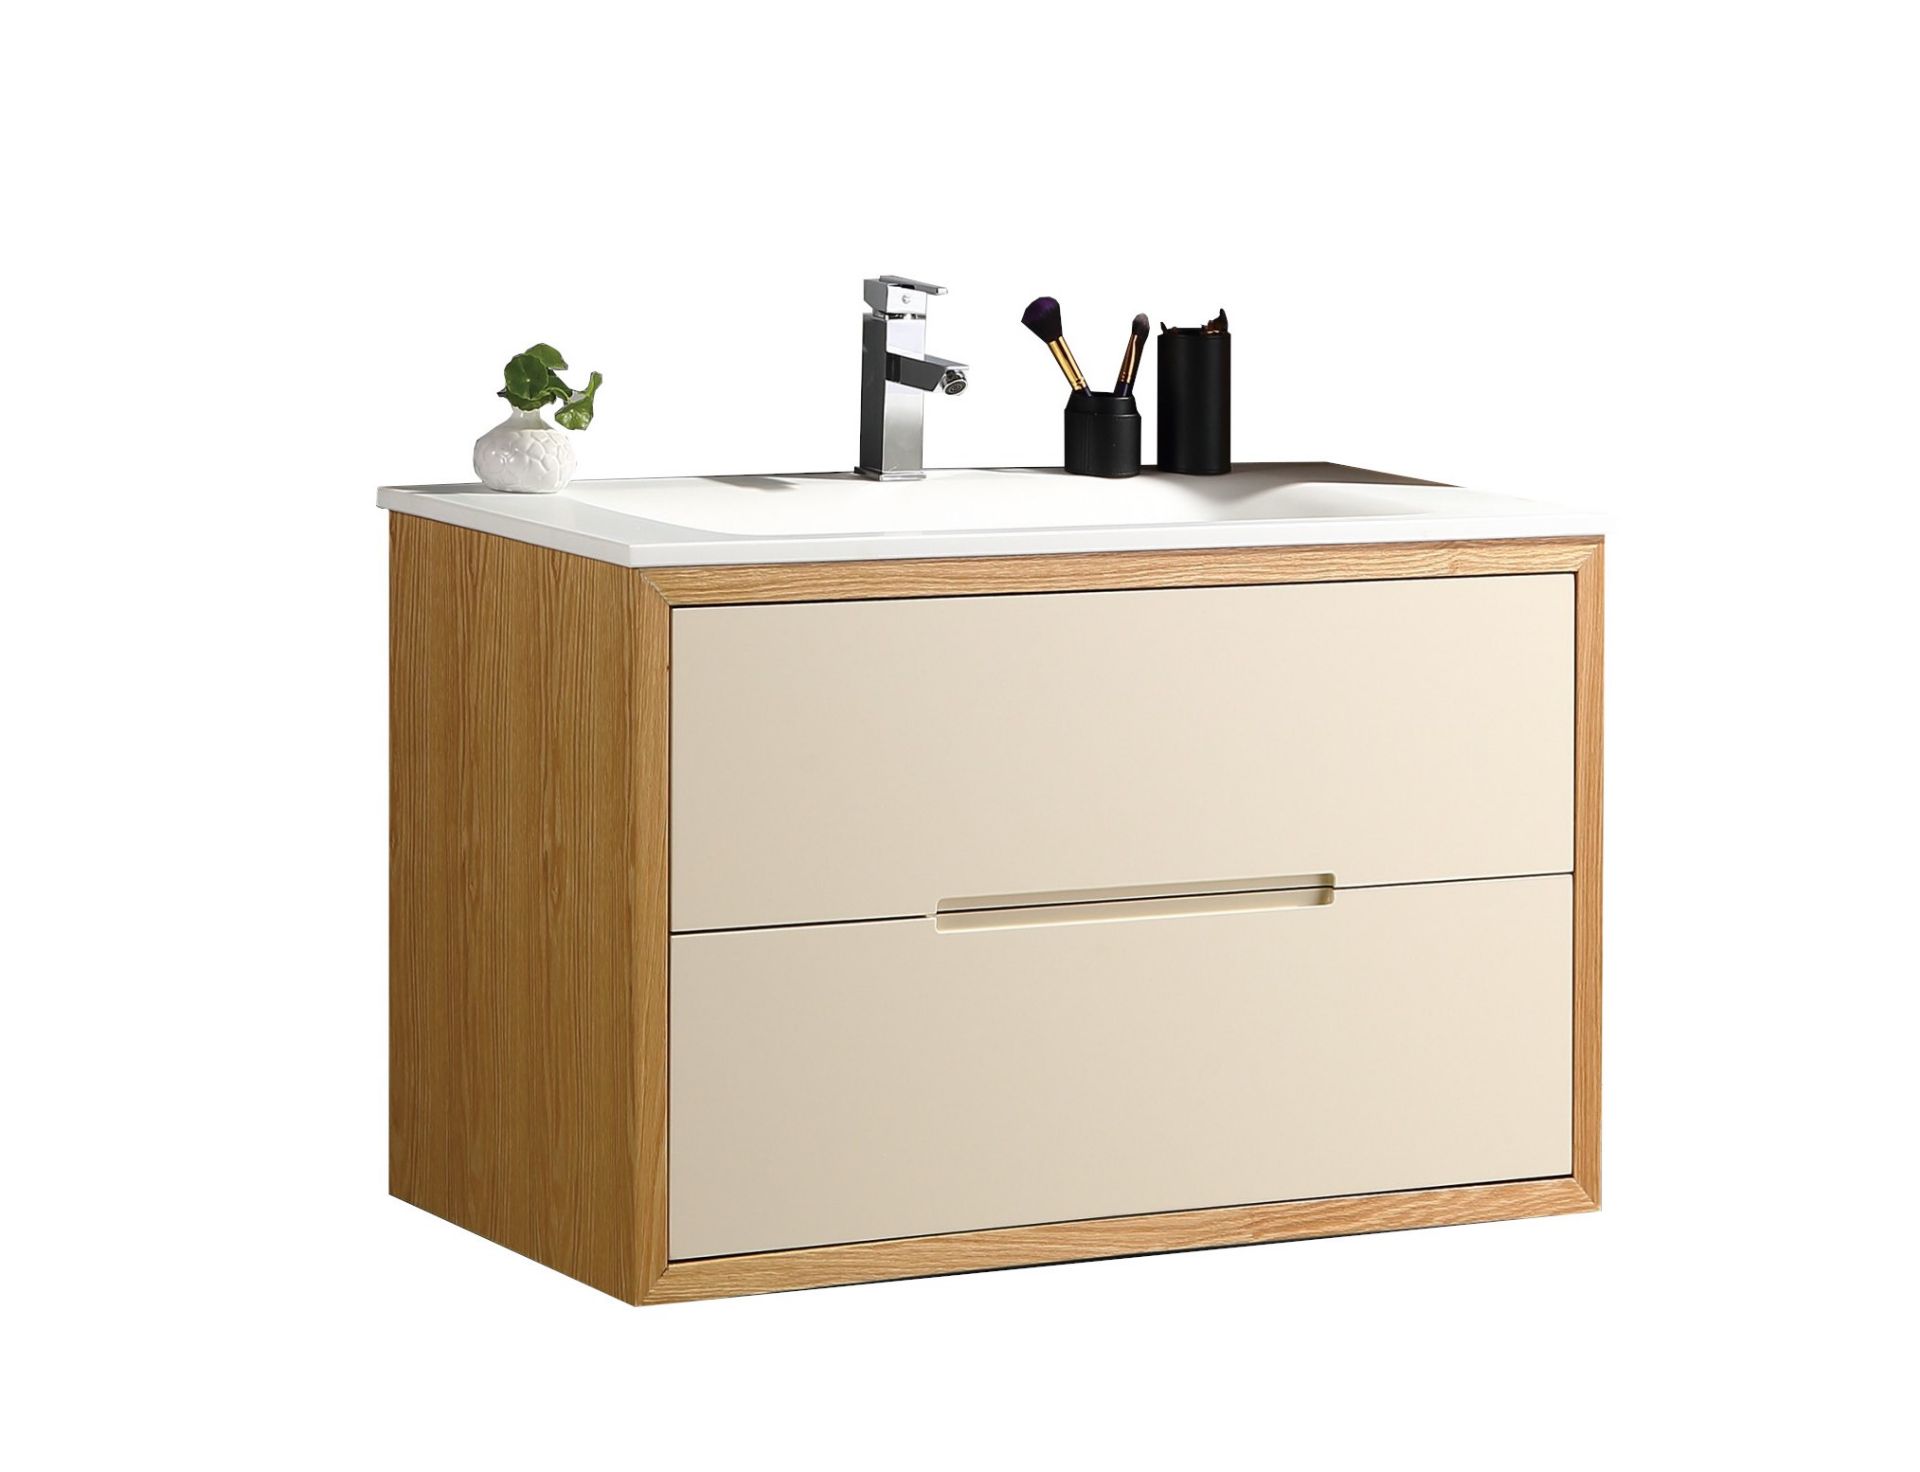 BRAND NEW Complete Vanity Unit Set in Beige with fixtures and fittings RRP £799.99 *NO VAT* - Image 5 of 5